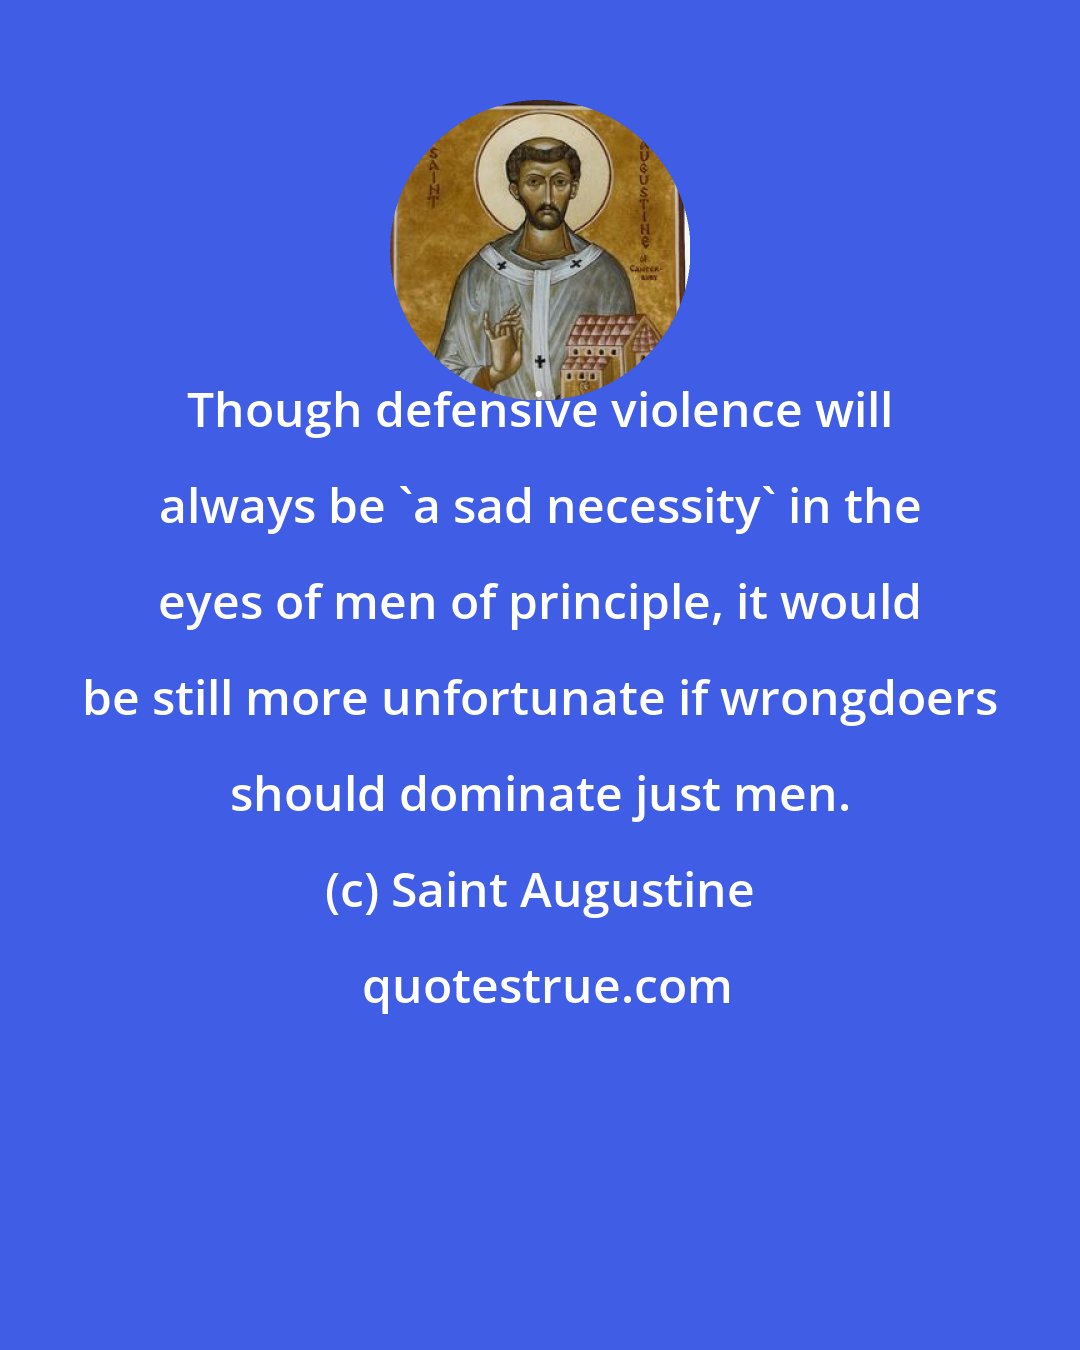 Saint Augustine: Though defensive violence will always be 'a sad necessity' in the eyes of men of principle, it would be still more unfortunate if wrongdoers should dominate just men.